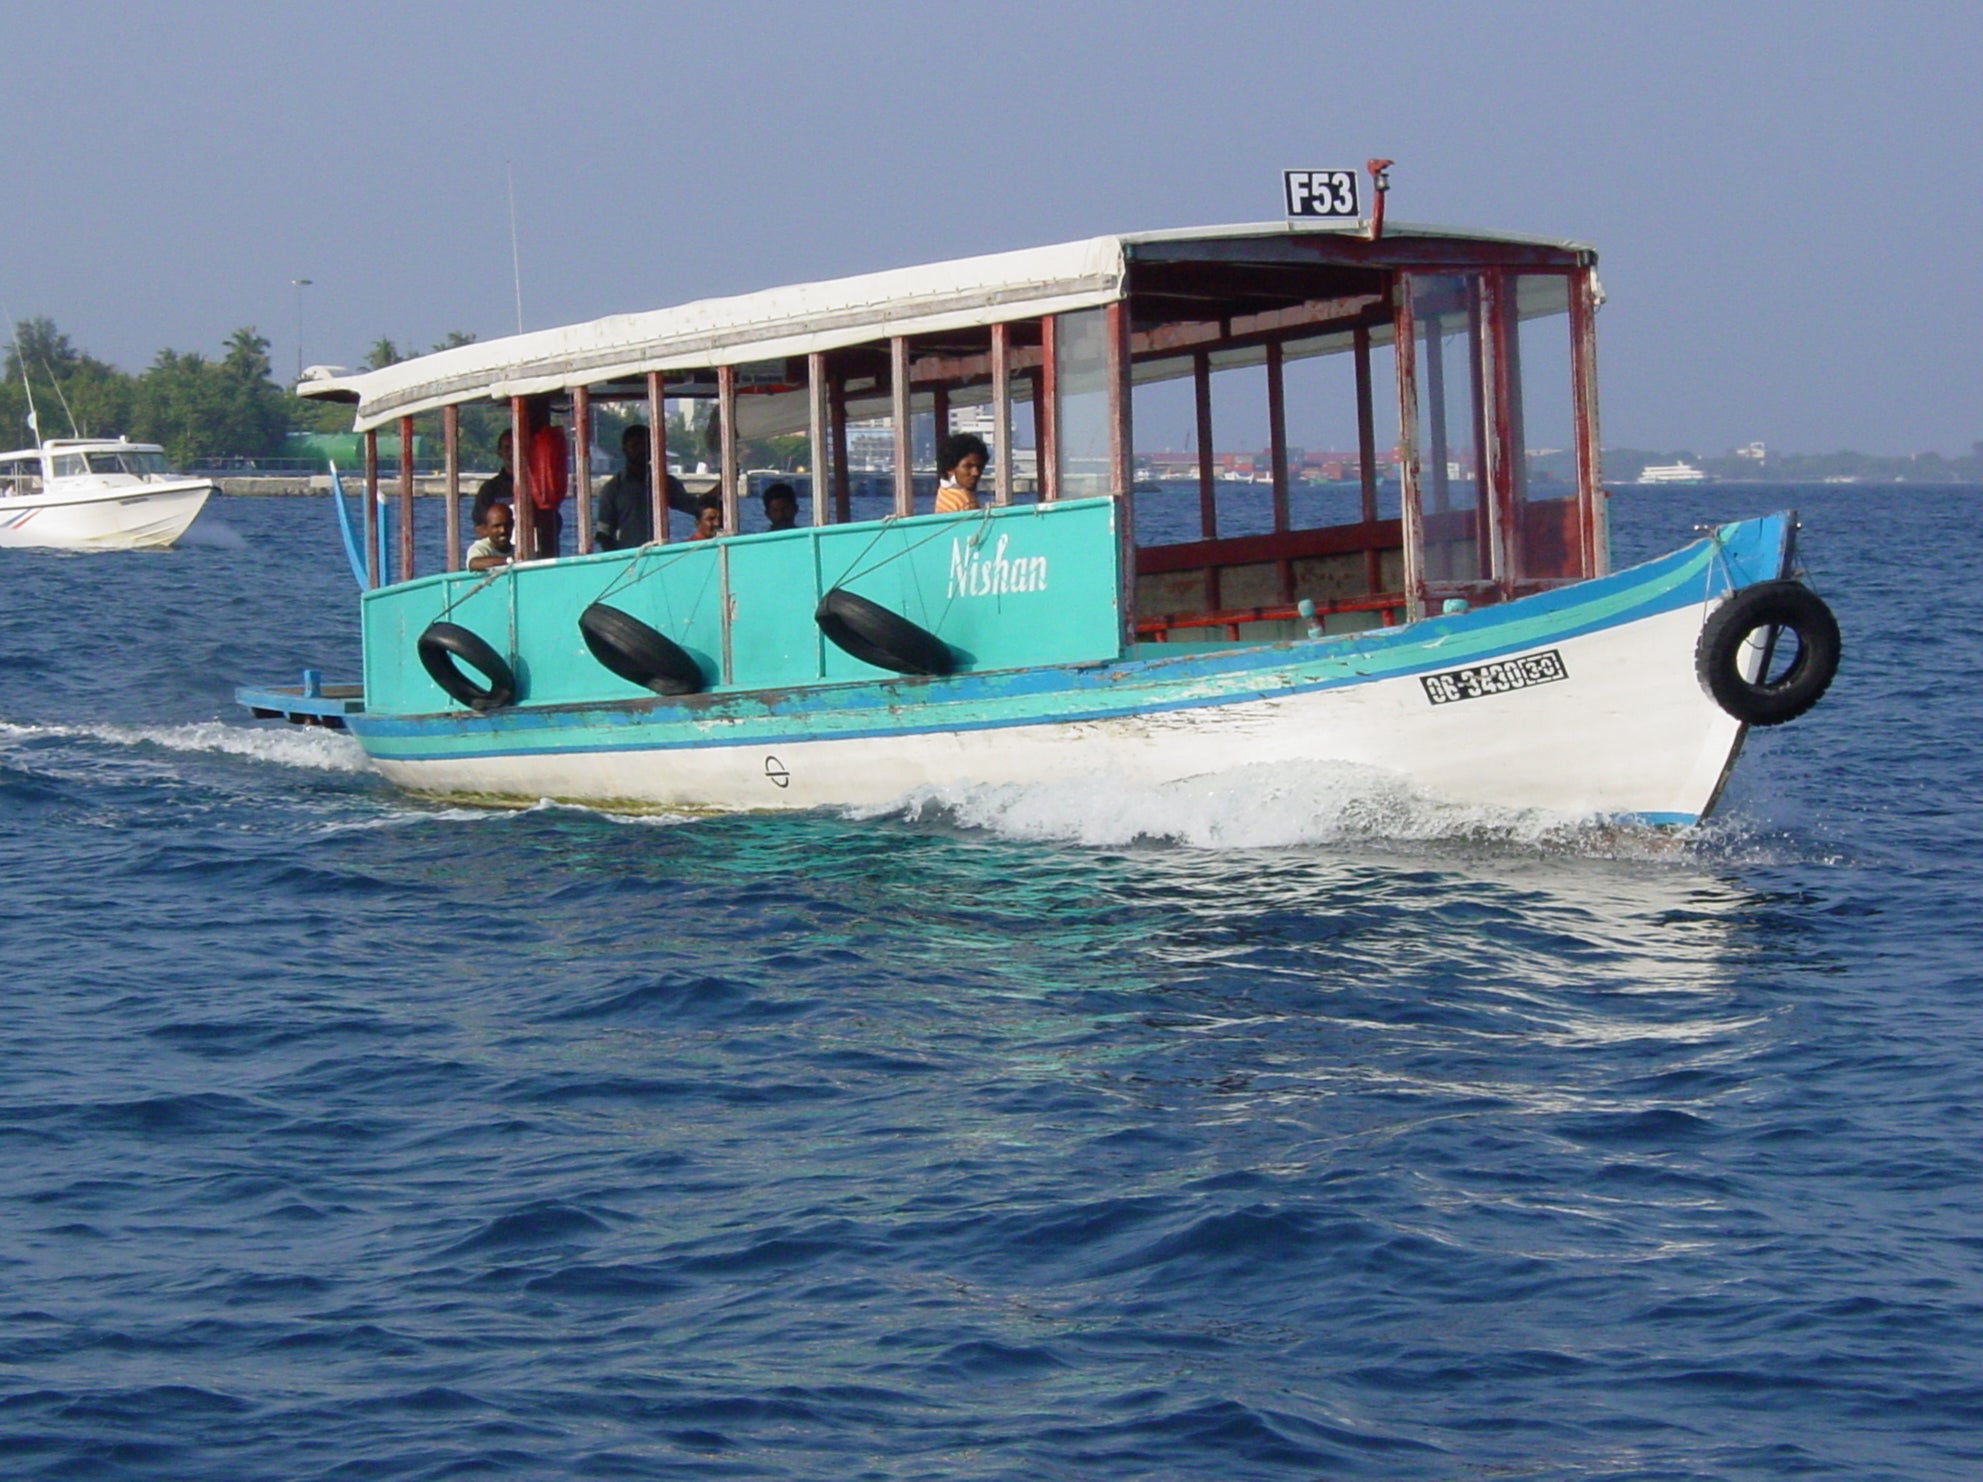 All aboard: the ferry that serves as the airport bus in the Maldives